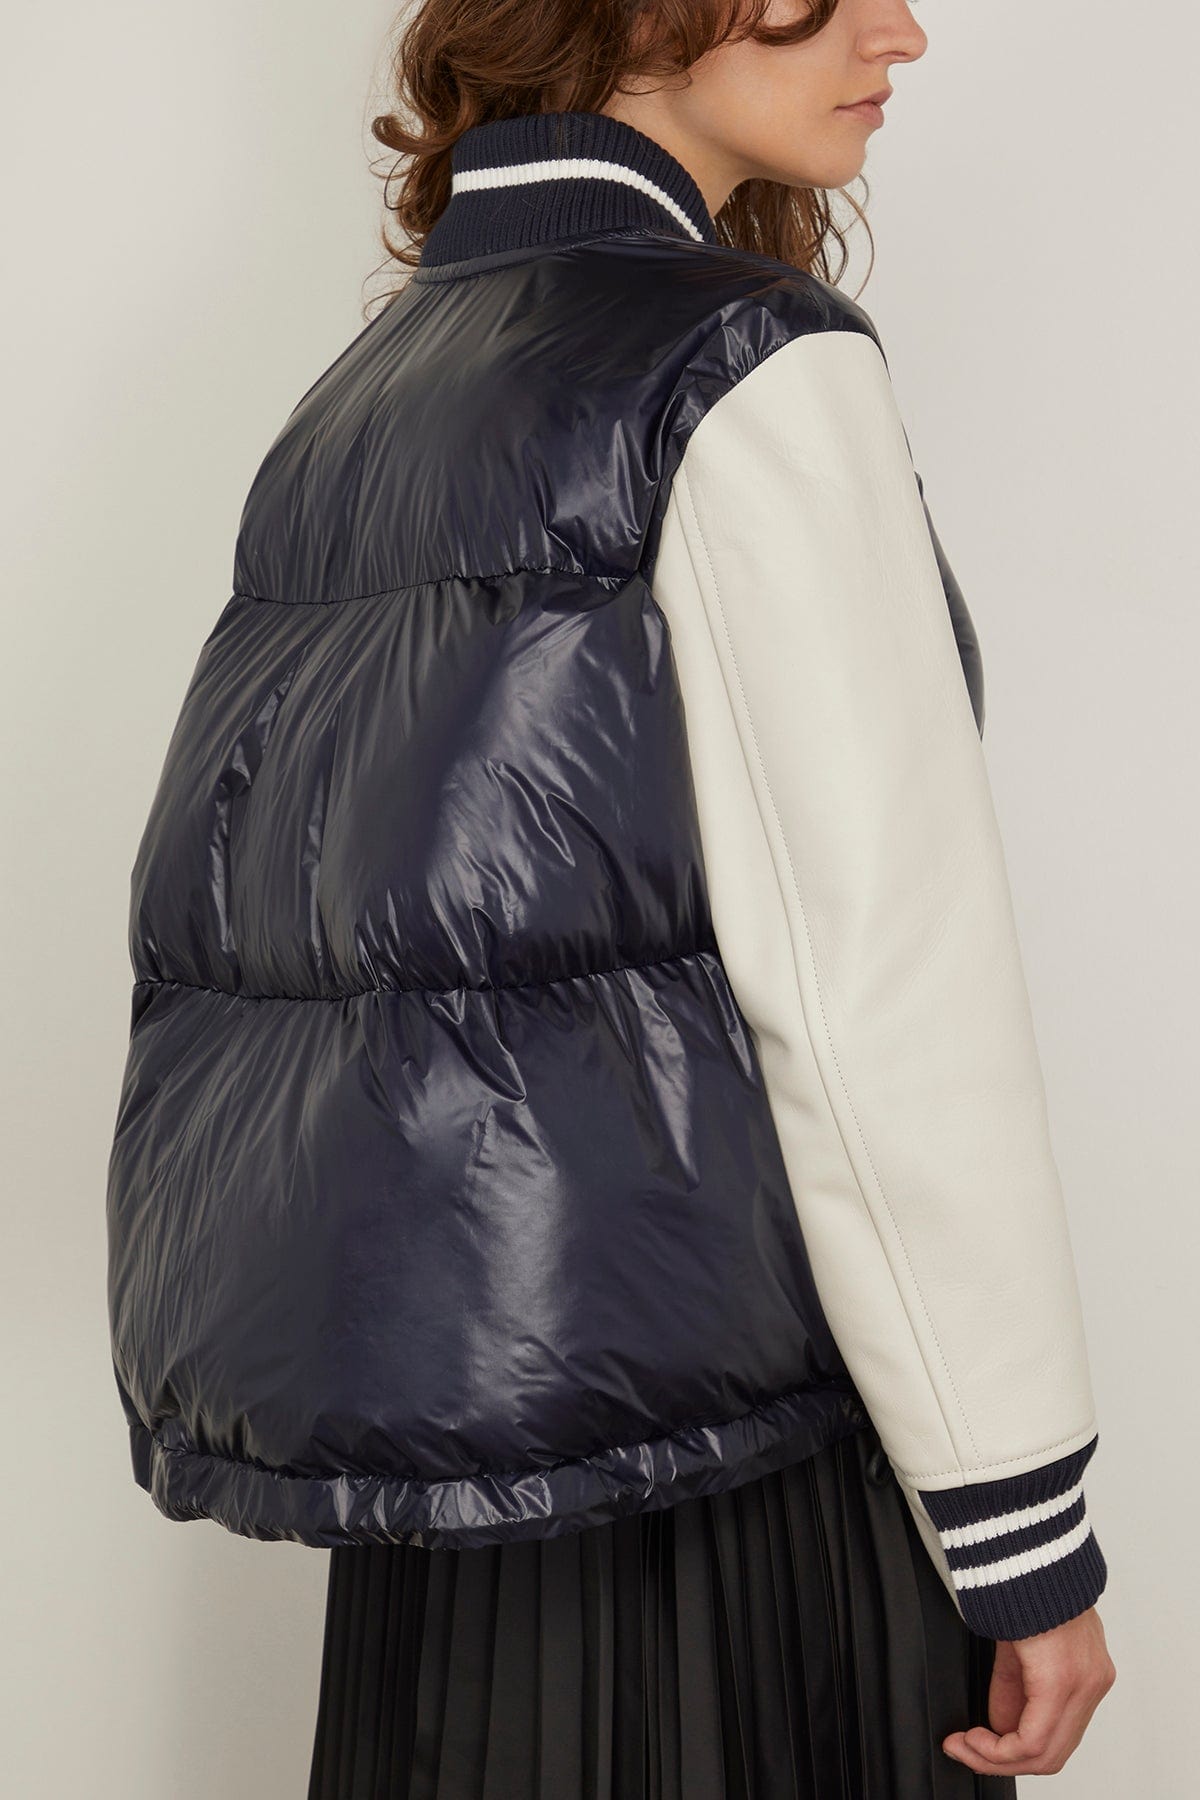 Sacai Jackets Padded Blouson in Navy/Off White Sacai Padded Blouson in Navy/Off White